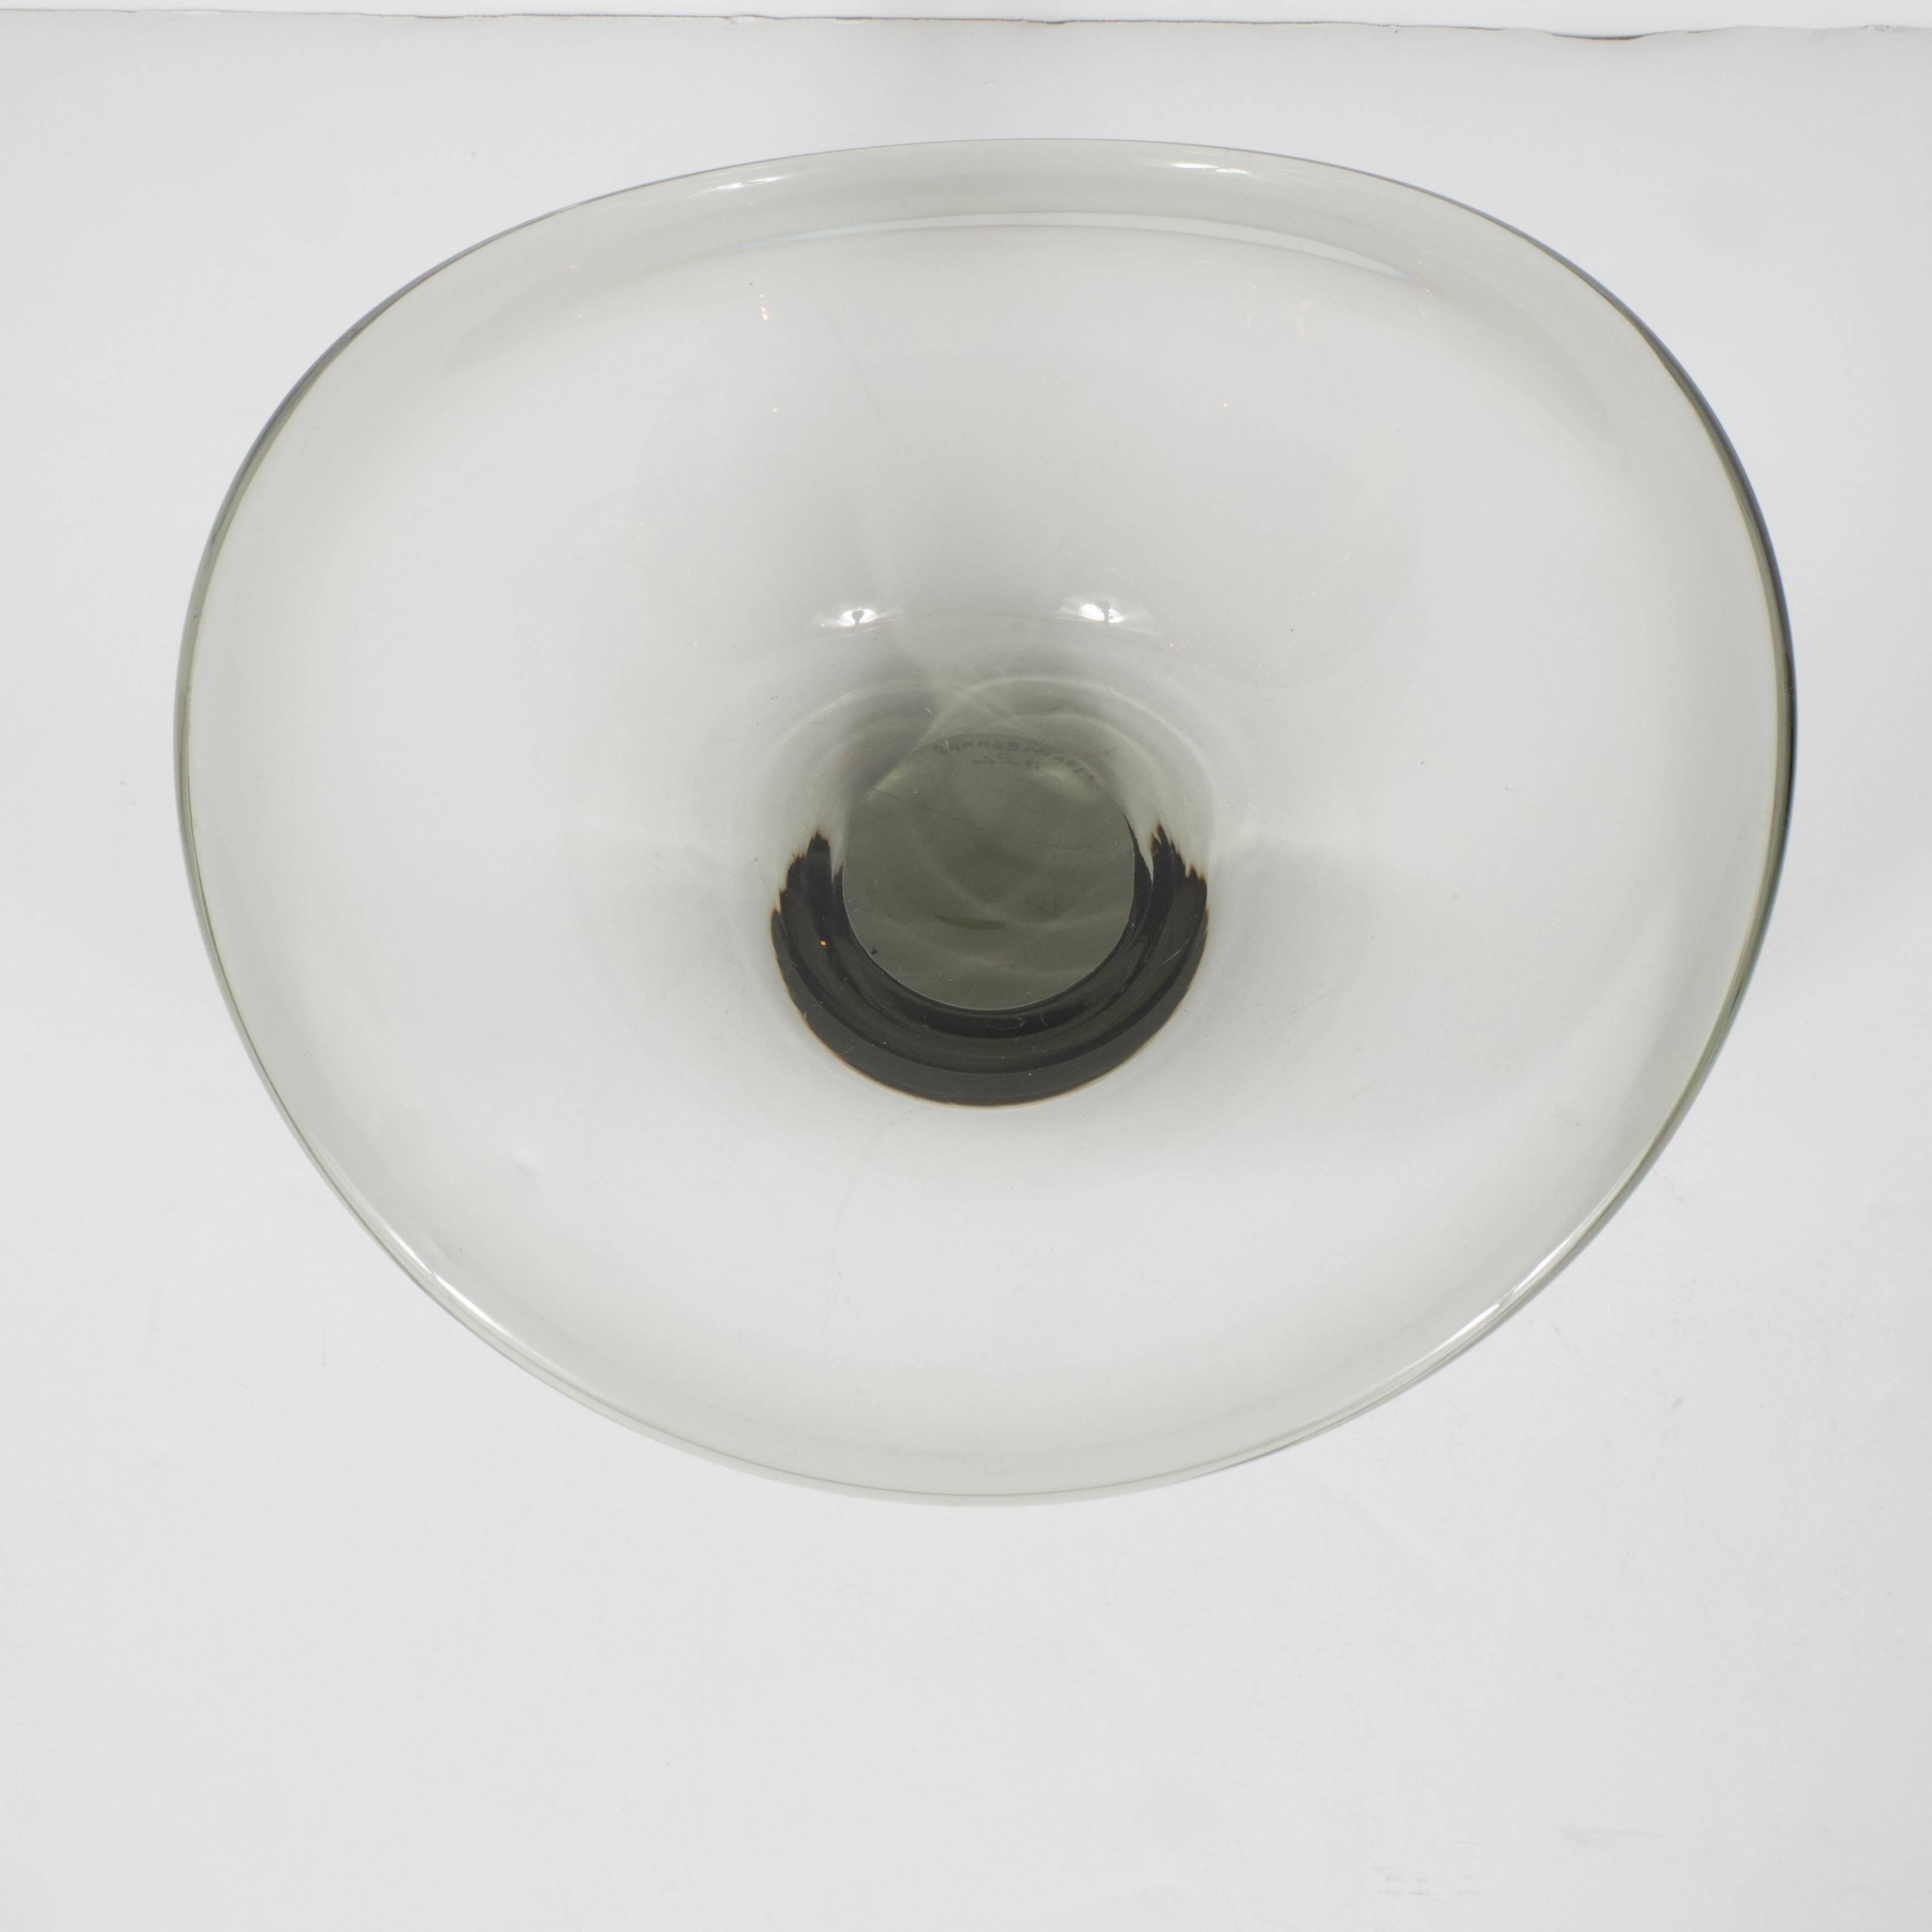 A Mid-Century smoked glass curved bowl by Holmegaard of Denmark. A flat base and circular form features curved wave-like rounded edges. Handblown in smoked grey glass with variances in color. Signed with date of manufacture, 1960, and signature